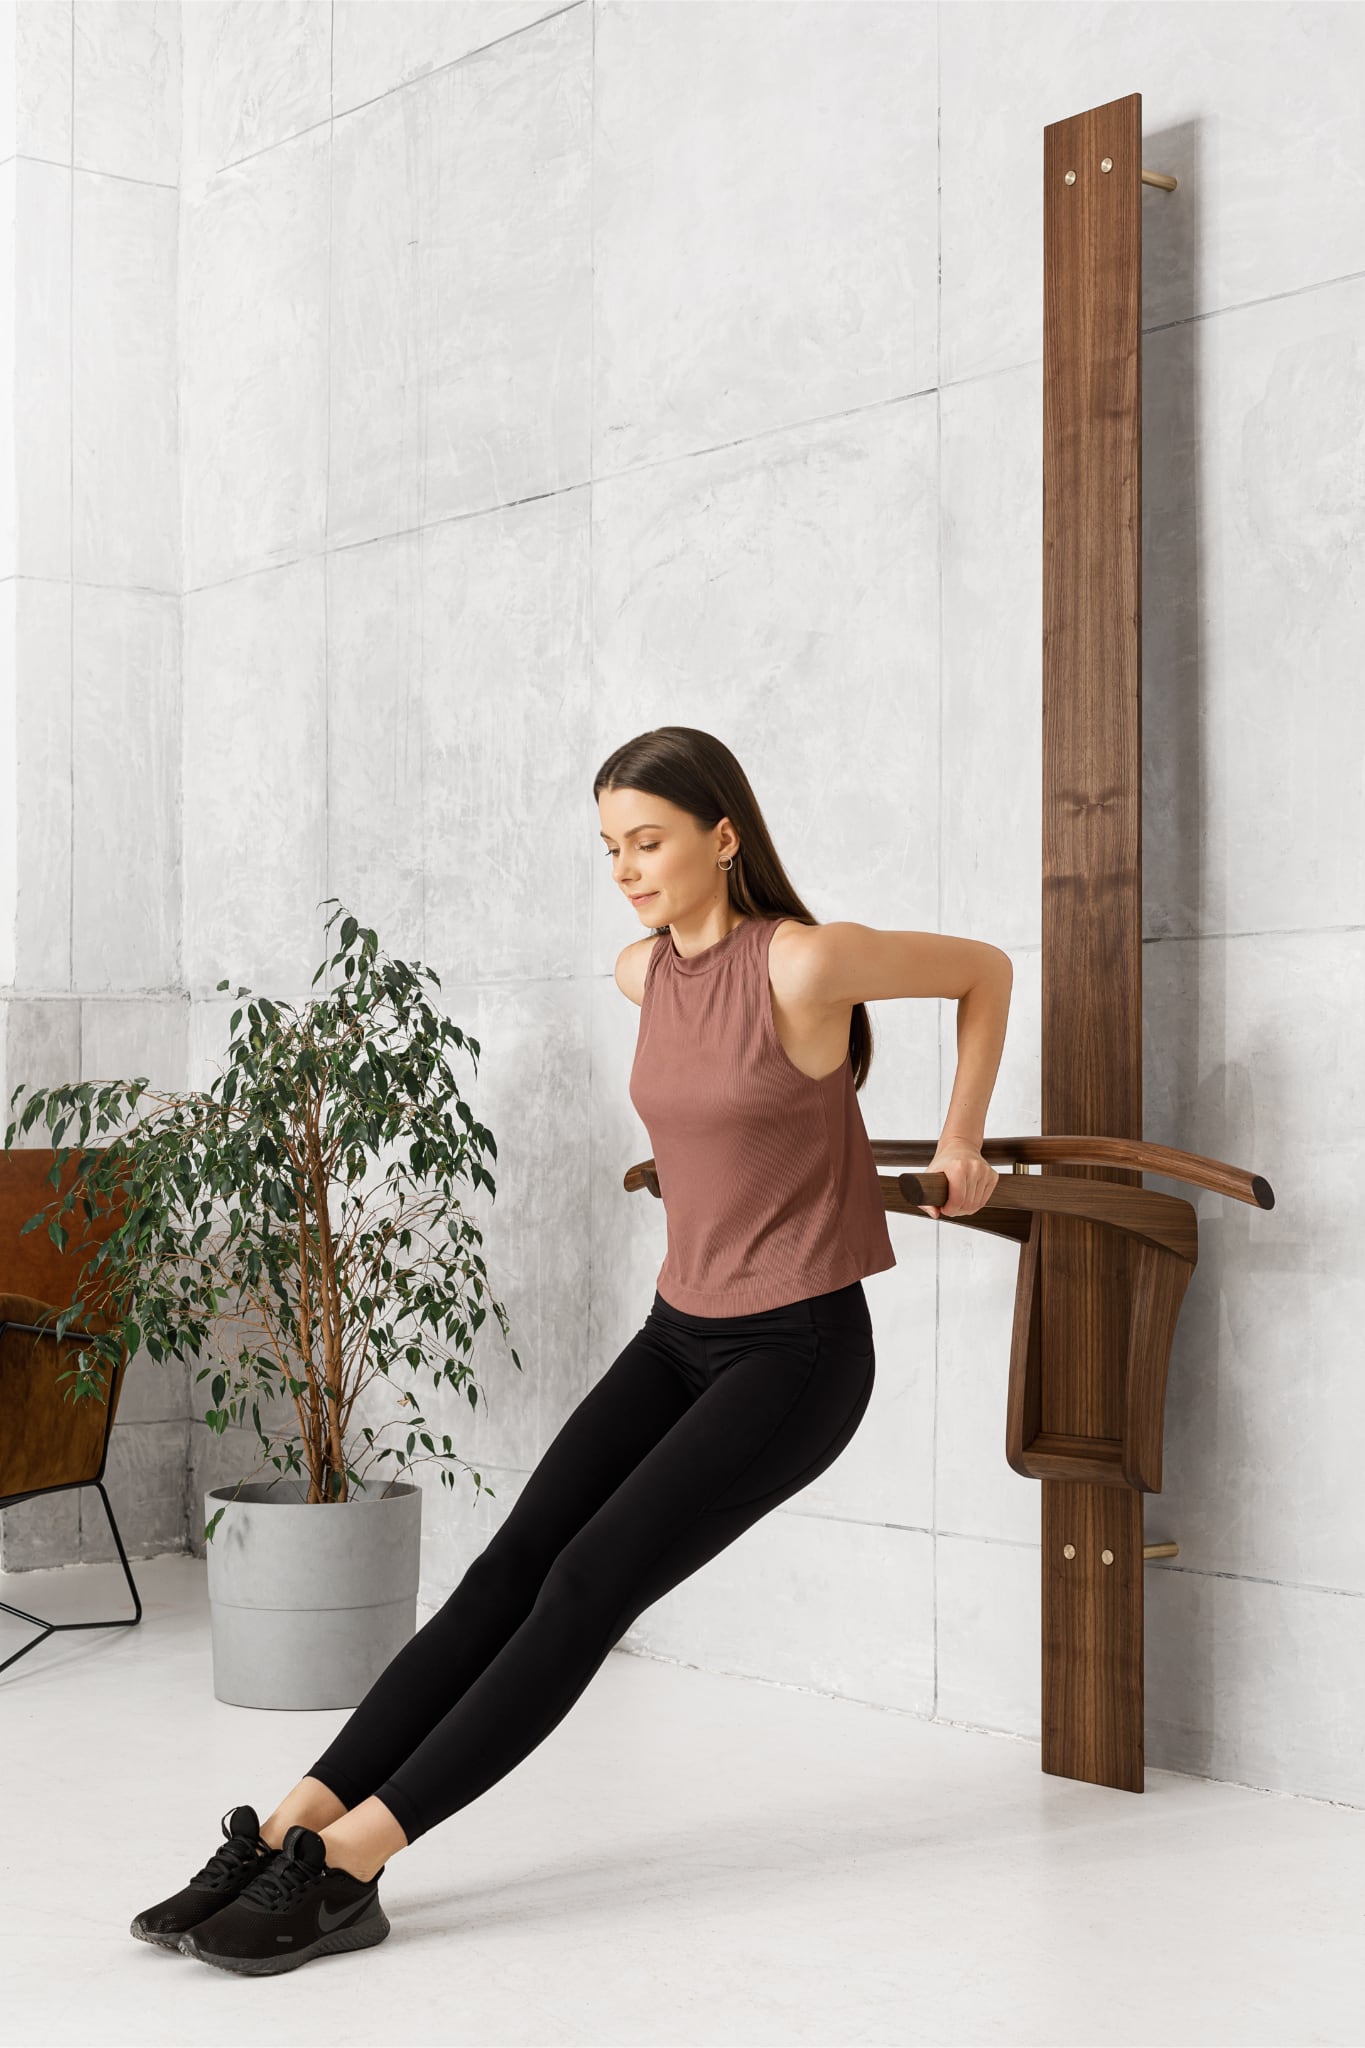 Synergee Dip Bar. Adjustable Dip Station from 30” – 39” for Dips, Inverted  Pull Ups. Max capacity 400 lbs. Portable Dip Stand for Total Body Workout.